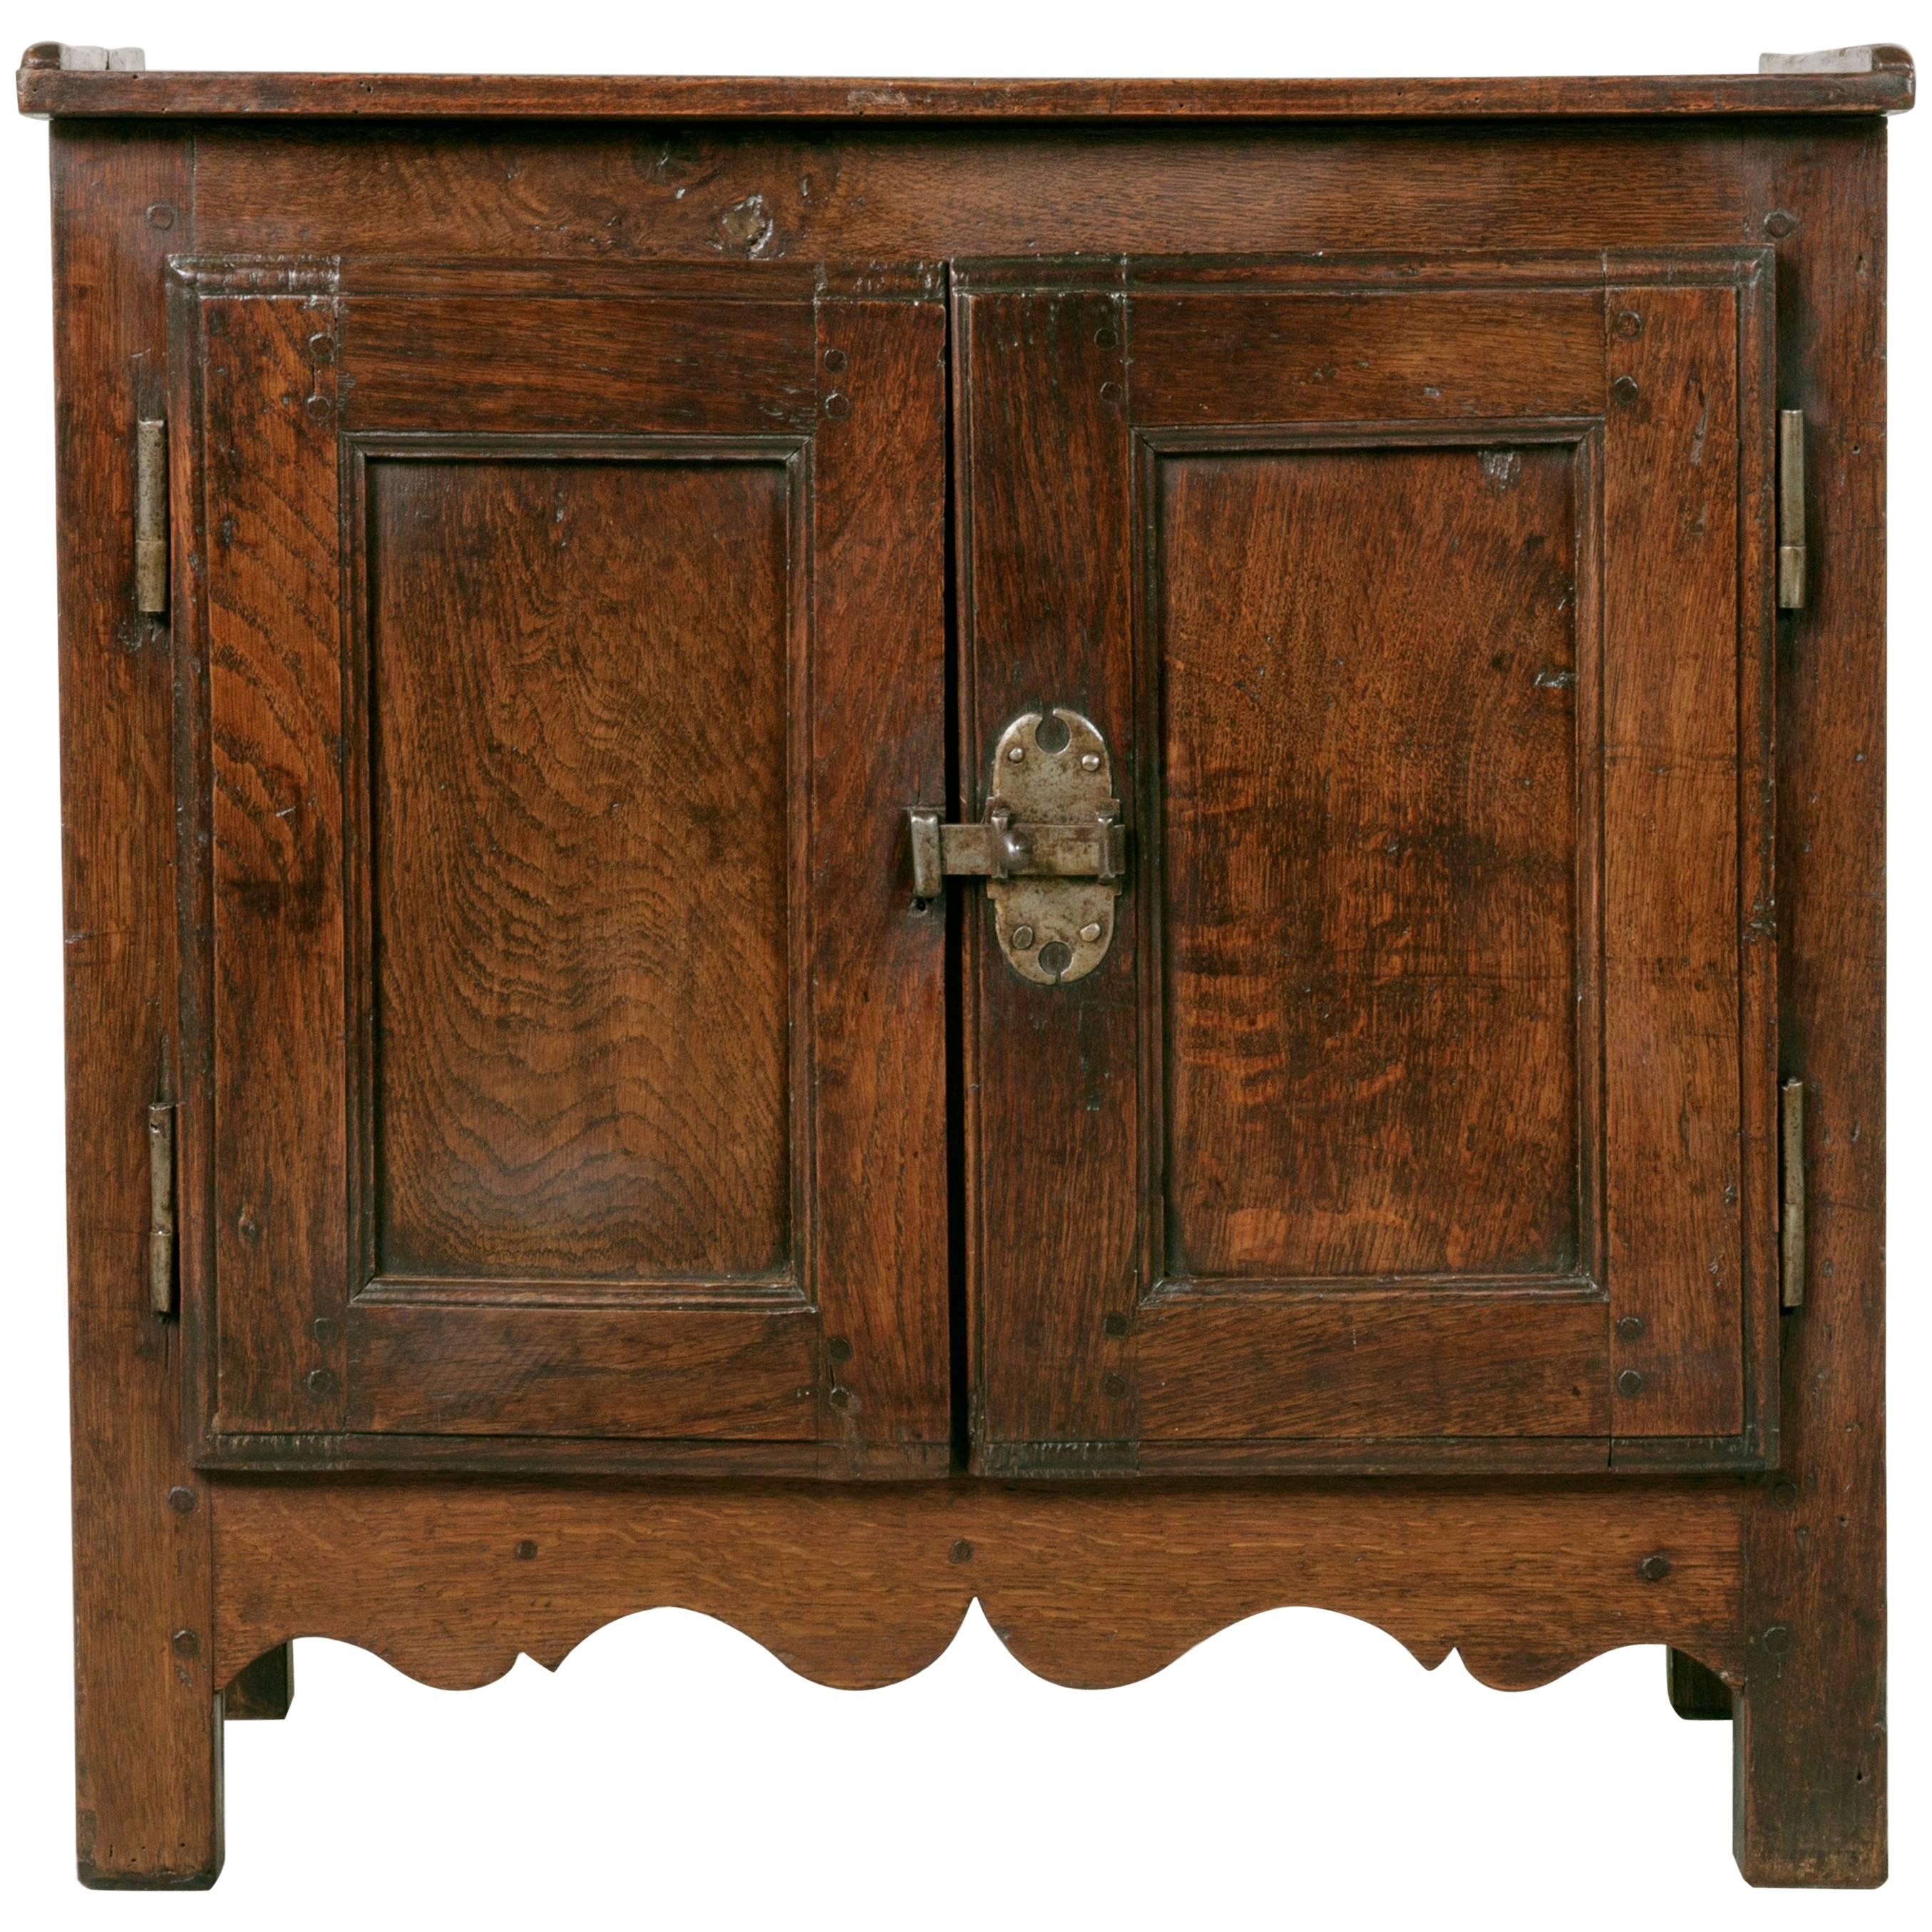 Late 18th Century Small Scale French Walnut Cabinet, Nightstand with Two Doors